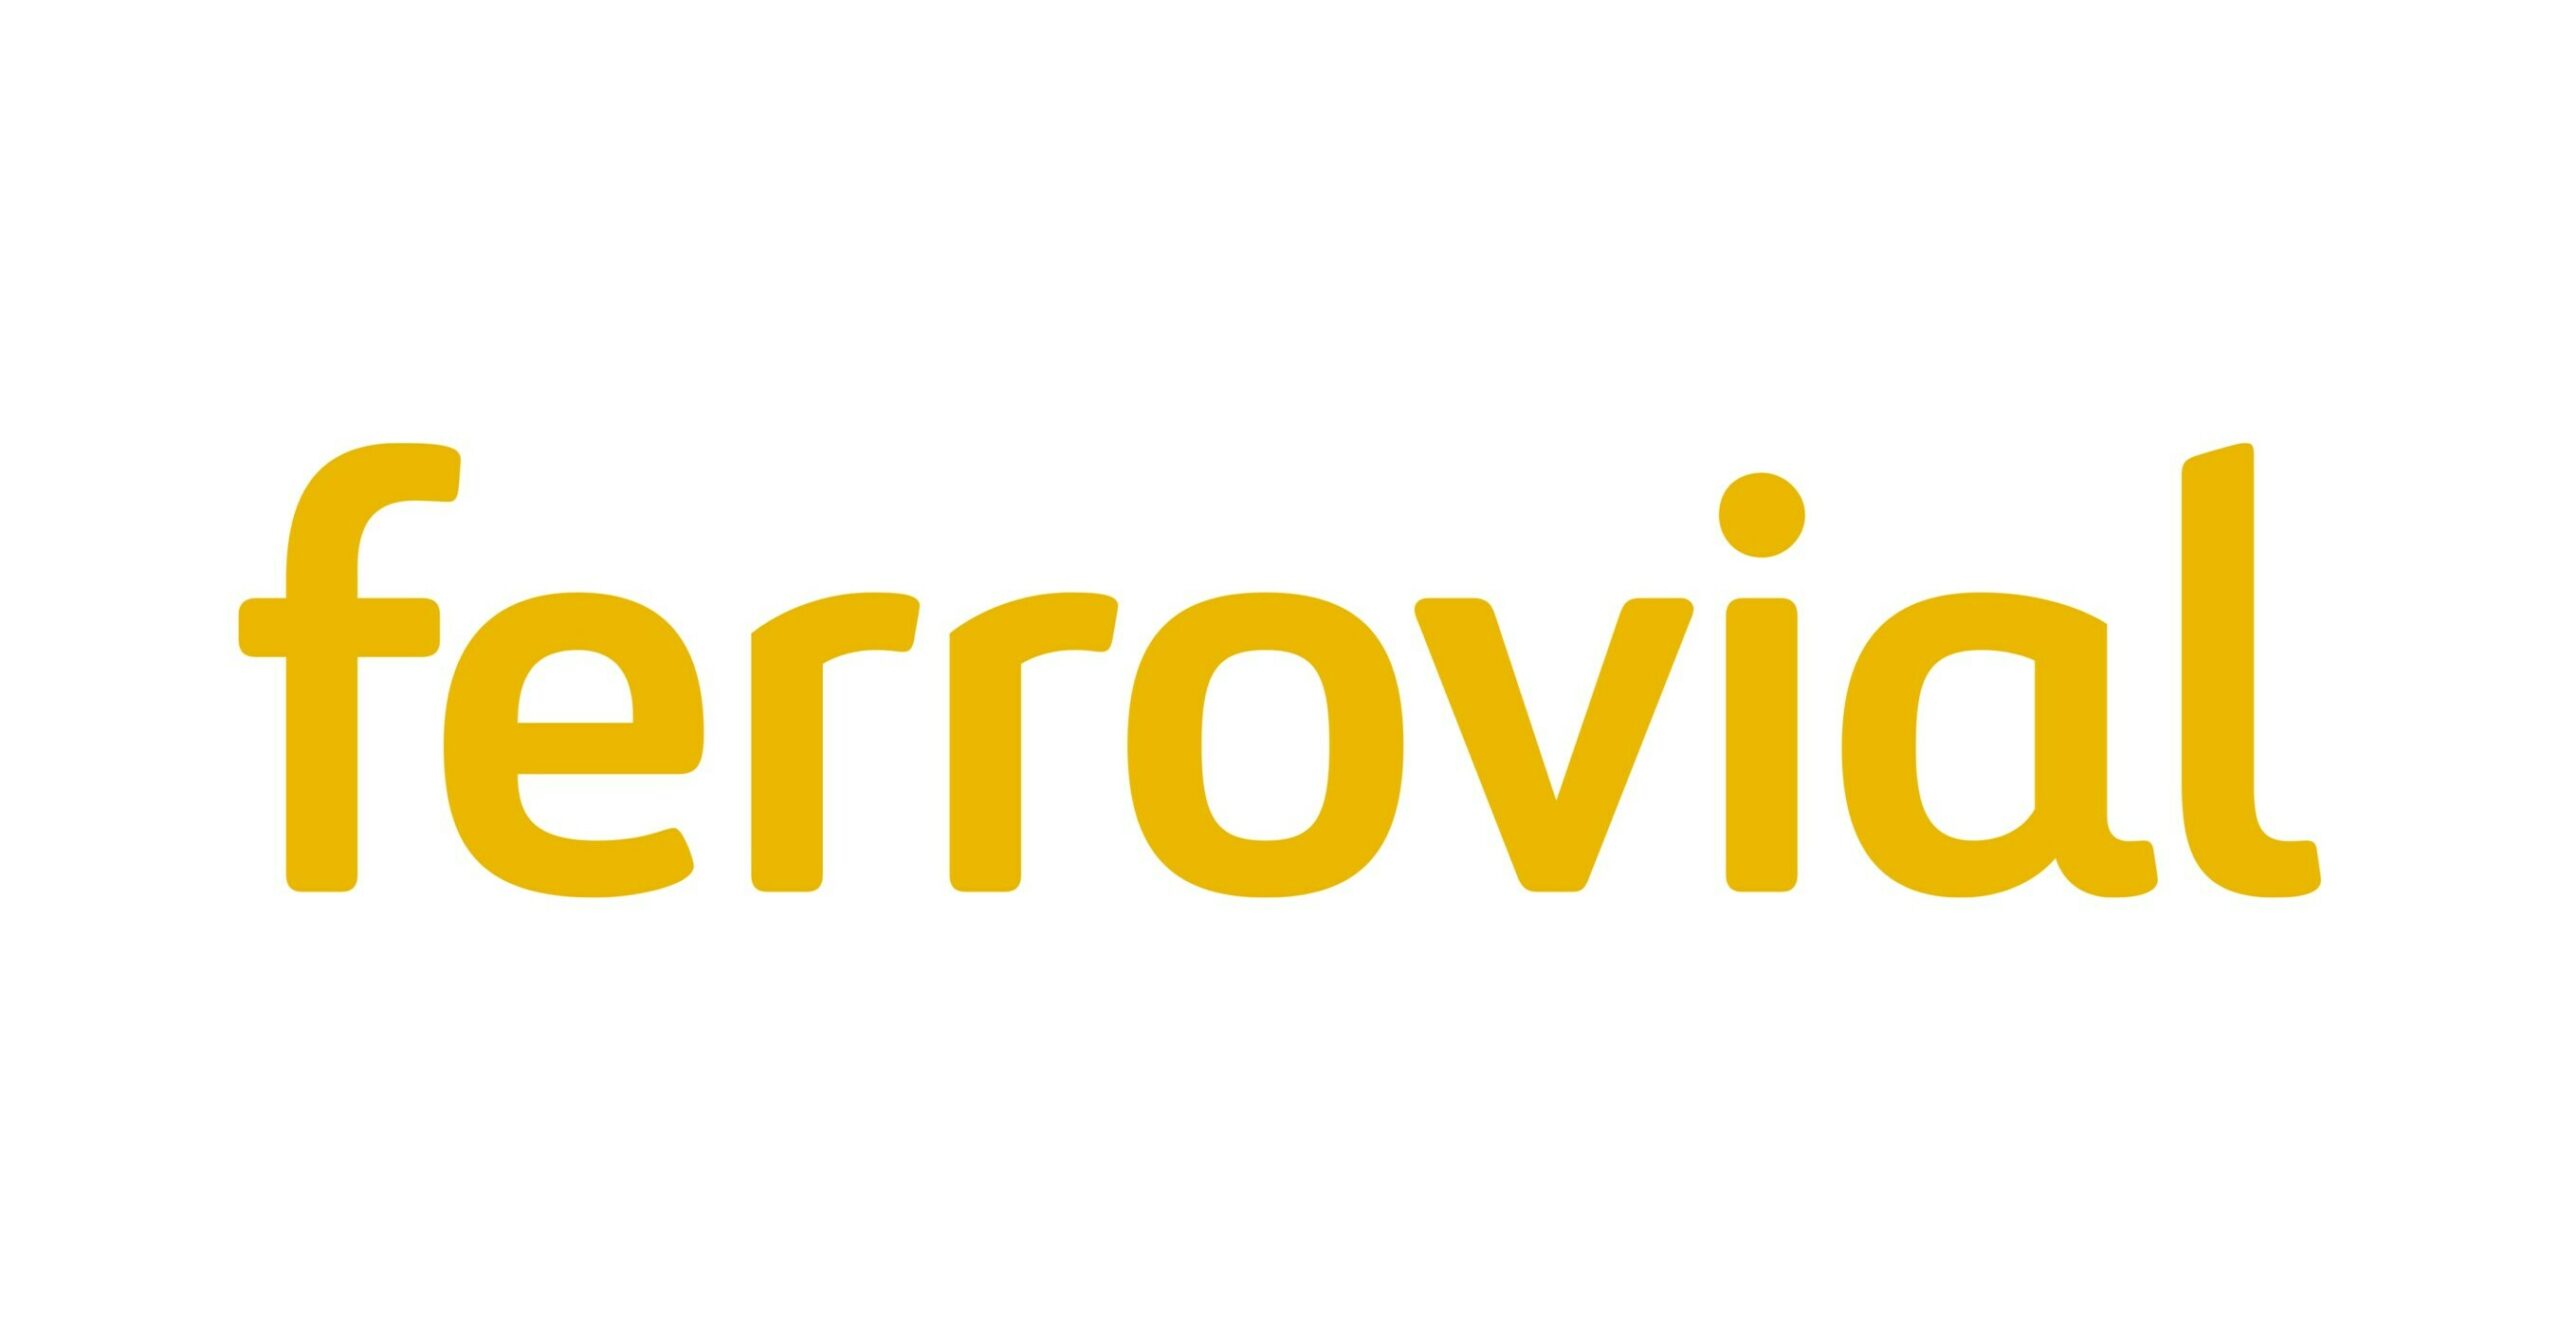 Ferrovial SE has an Outstanding Q1 Profit Increase During Nasdaq Debut